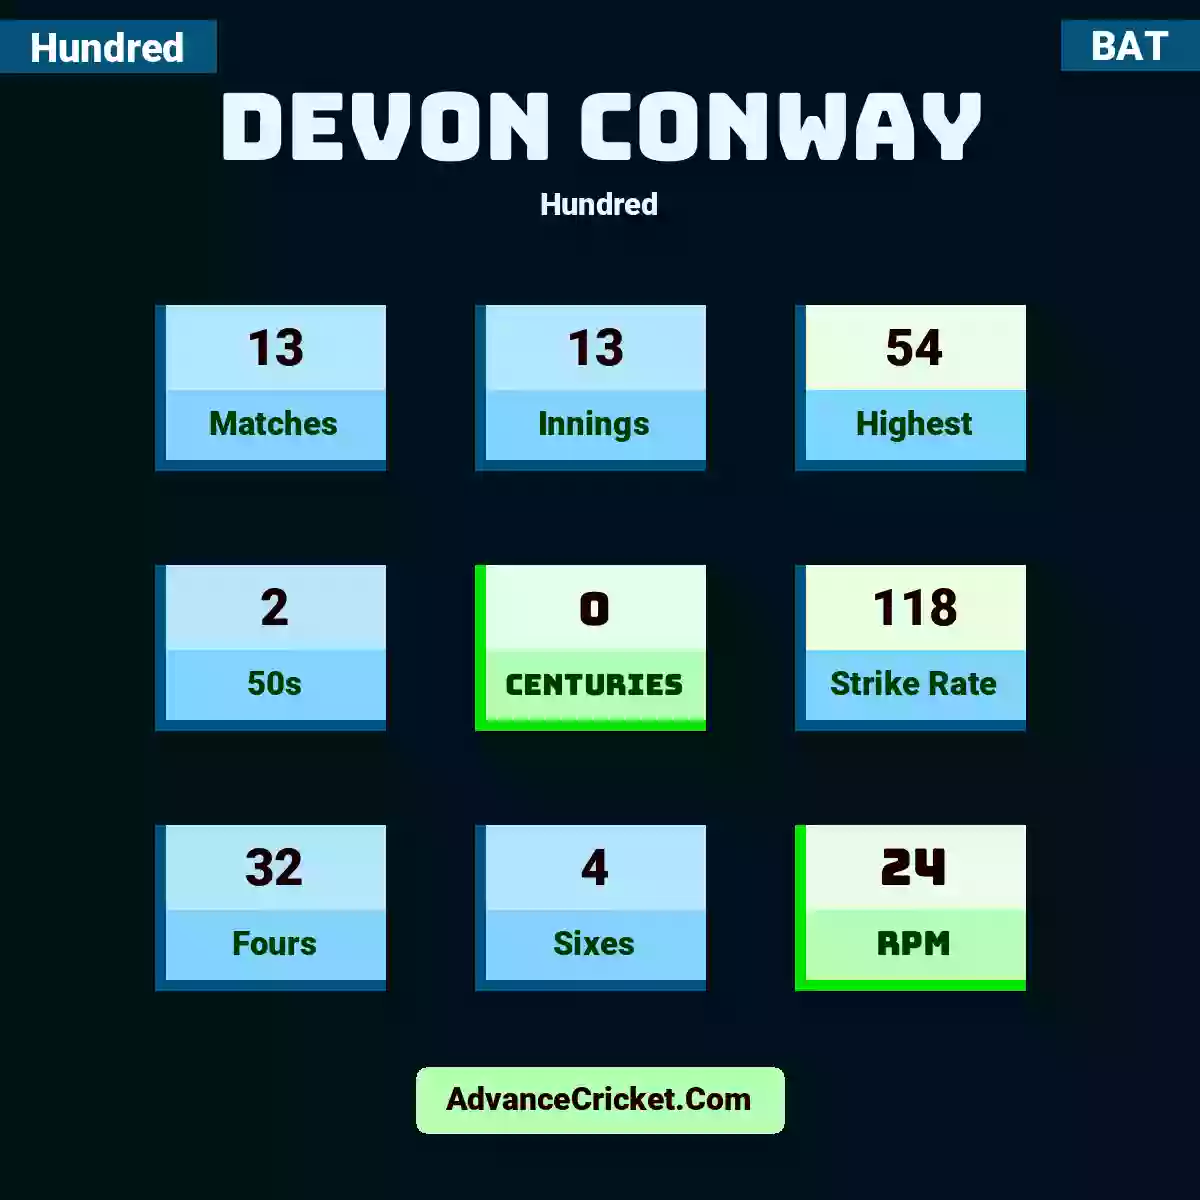 Devon Conway Hundred , Devon Conway played 13 matches, scored 54 runs as highest, 2 half-centuries, and 0 centuries, with a strike rate of 118. D.Conway hit 32 fours and 4 sixes, with an RPM of 24.